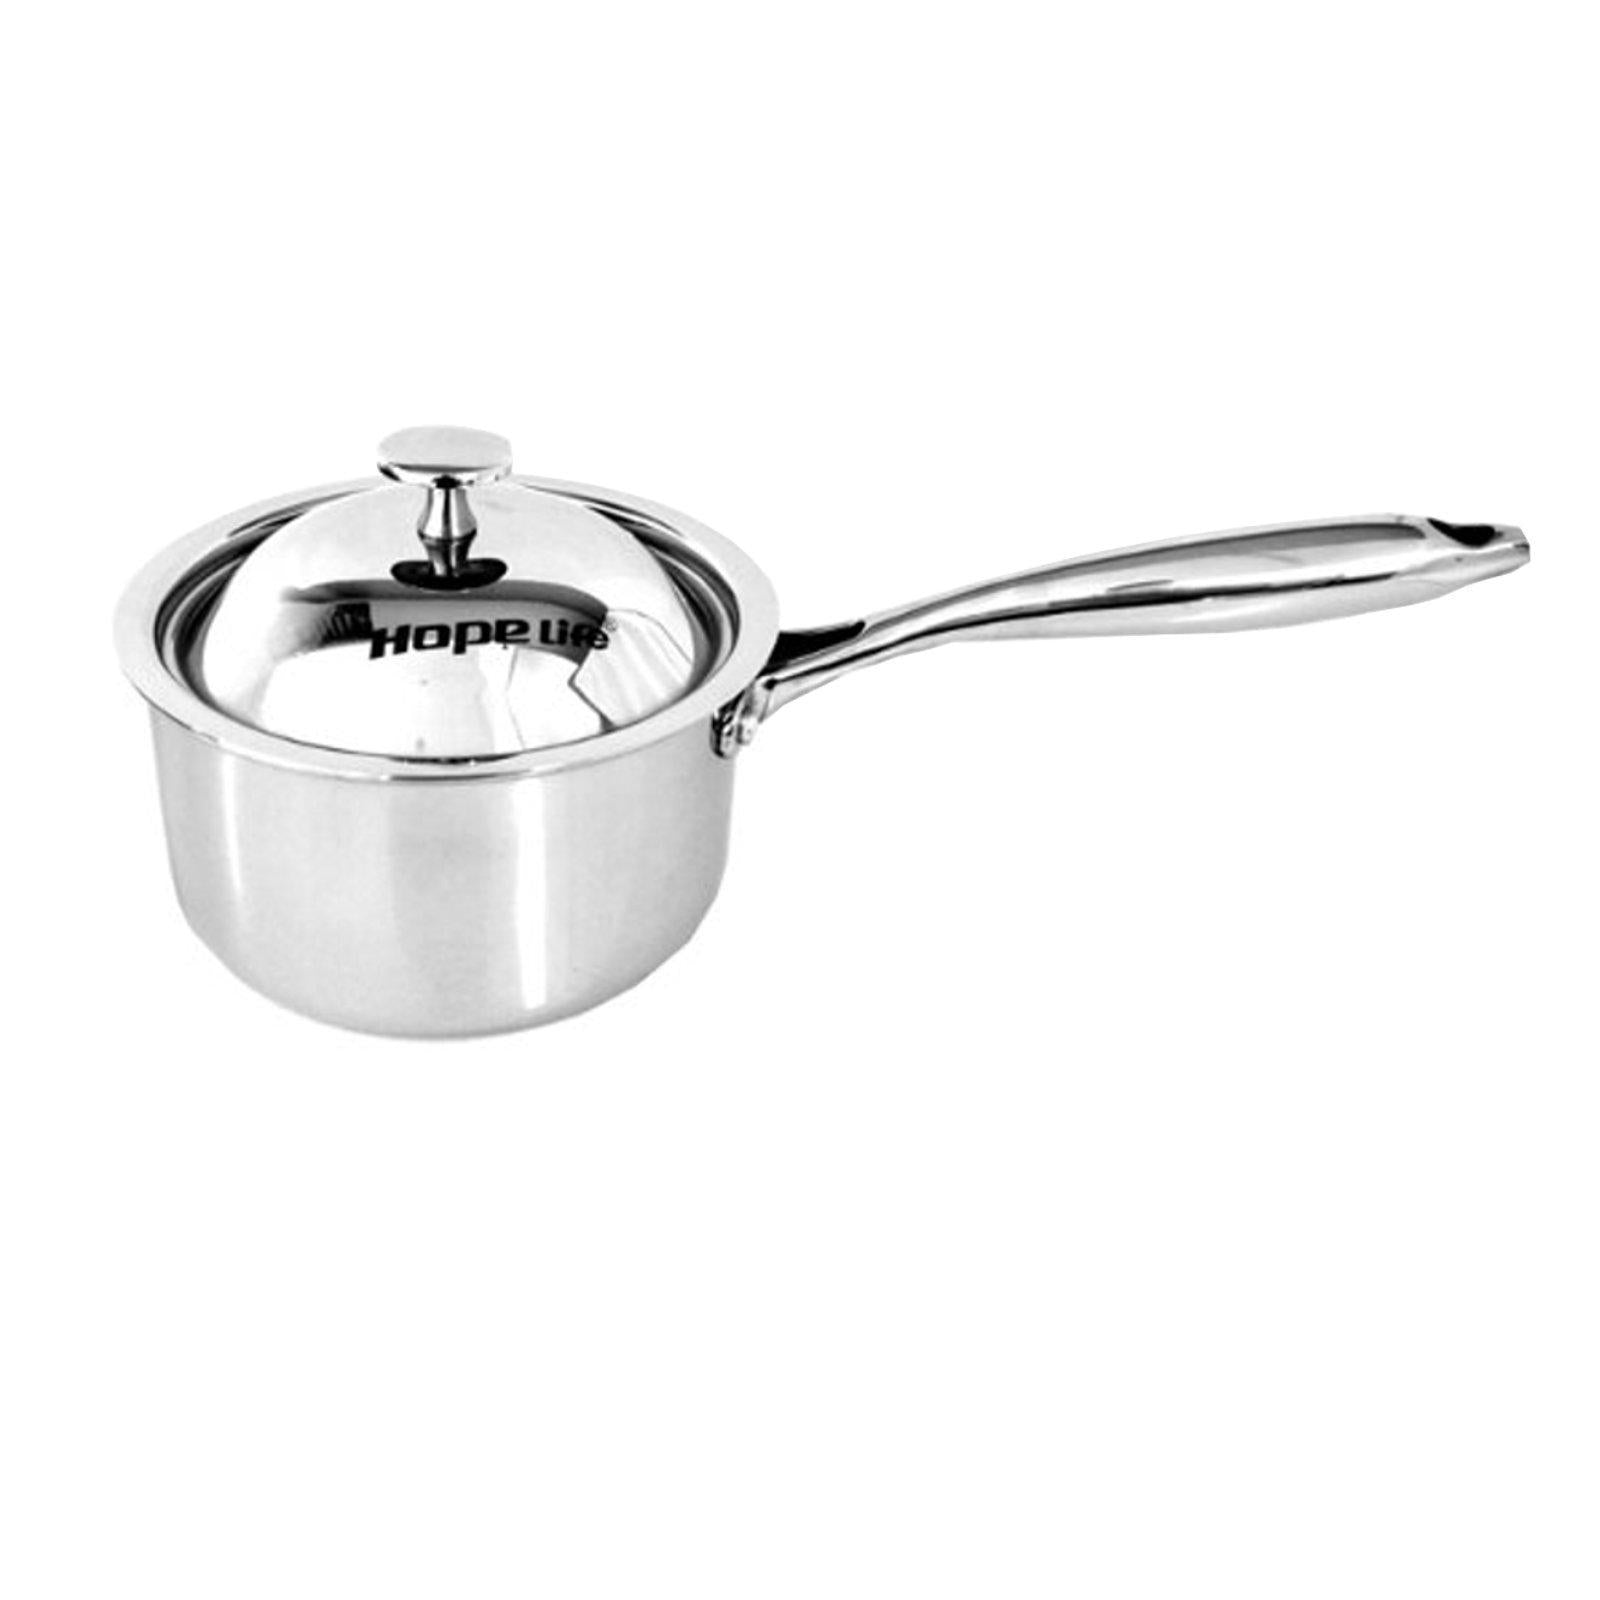 16 CM Stainless Steel Saucepan - Induction Compatible-Stainless Steel Cookware-Chef's Quality Cookware